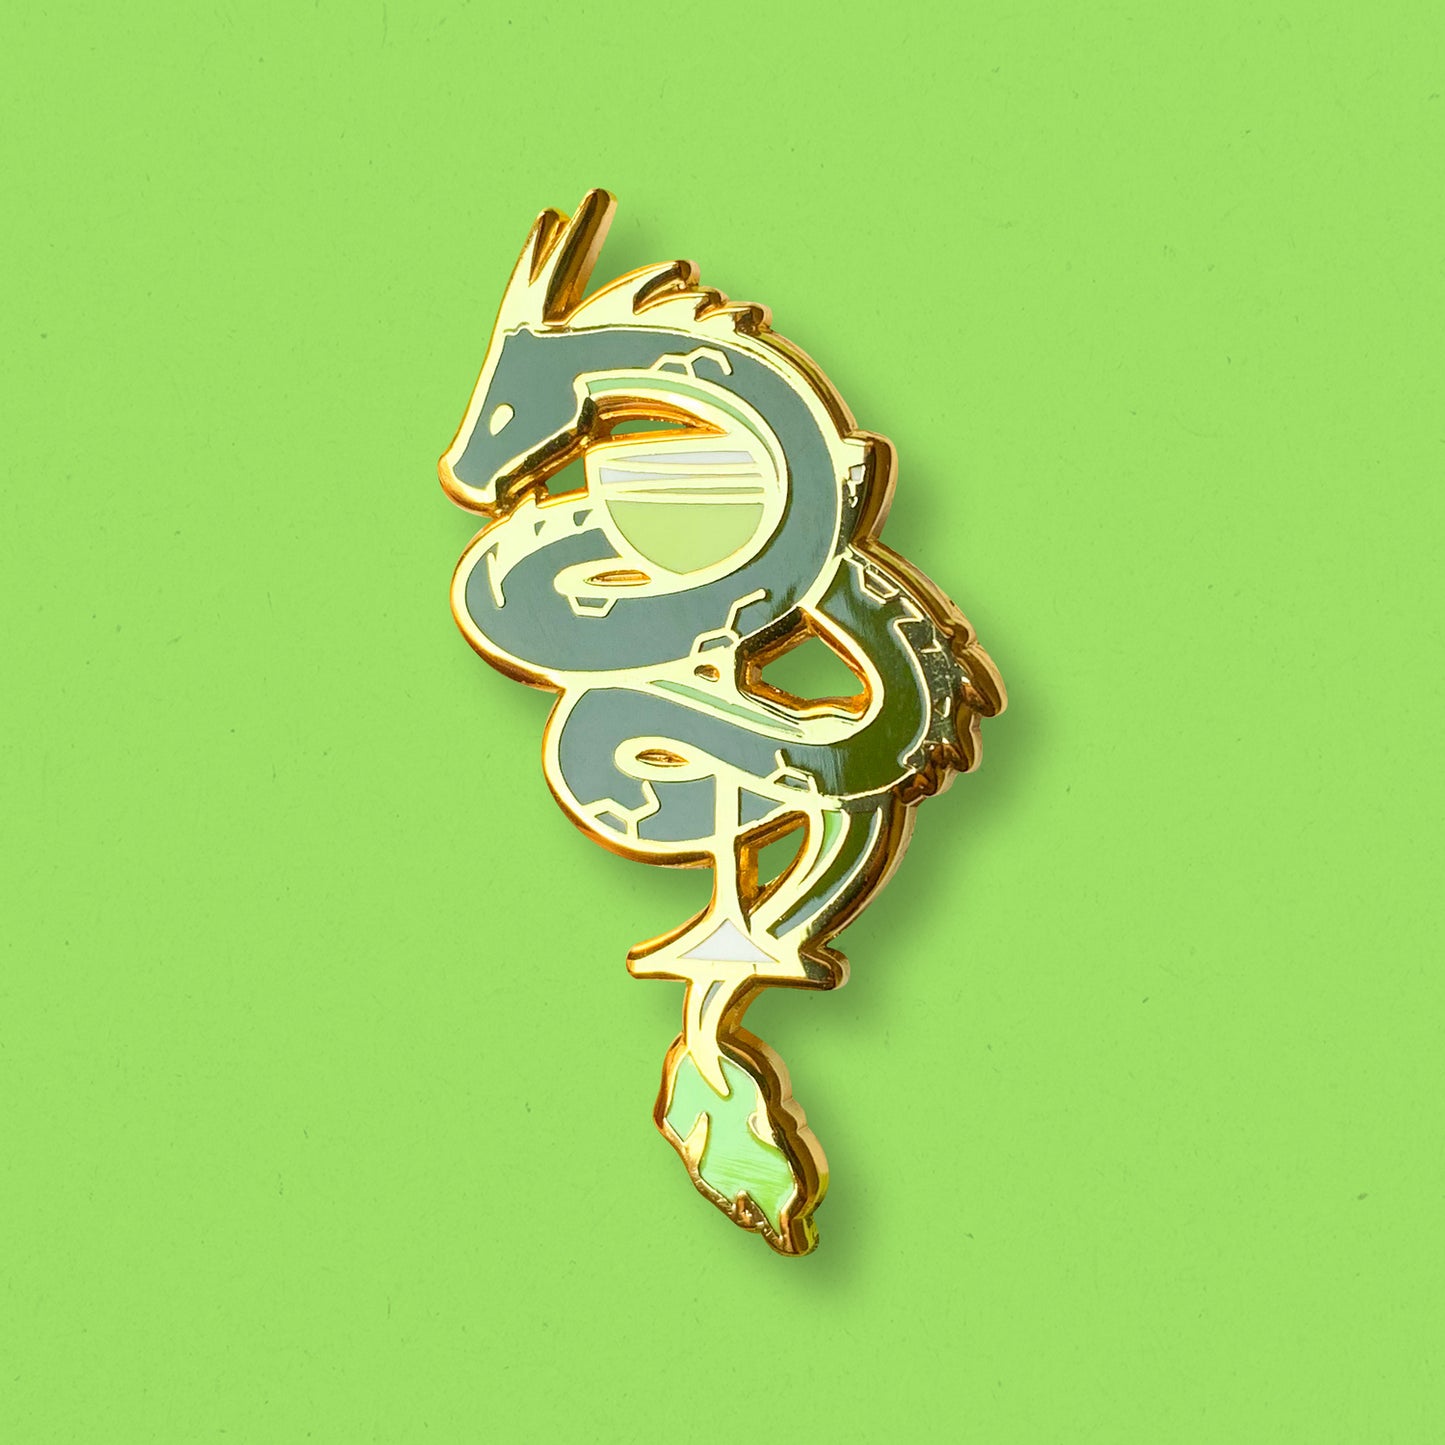 Dragon & Daiquiri Cocktail Hard Enamel Pin by Cocktail Critters